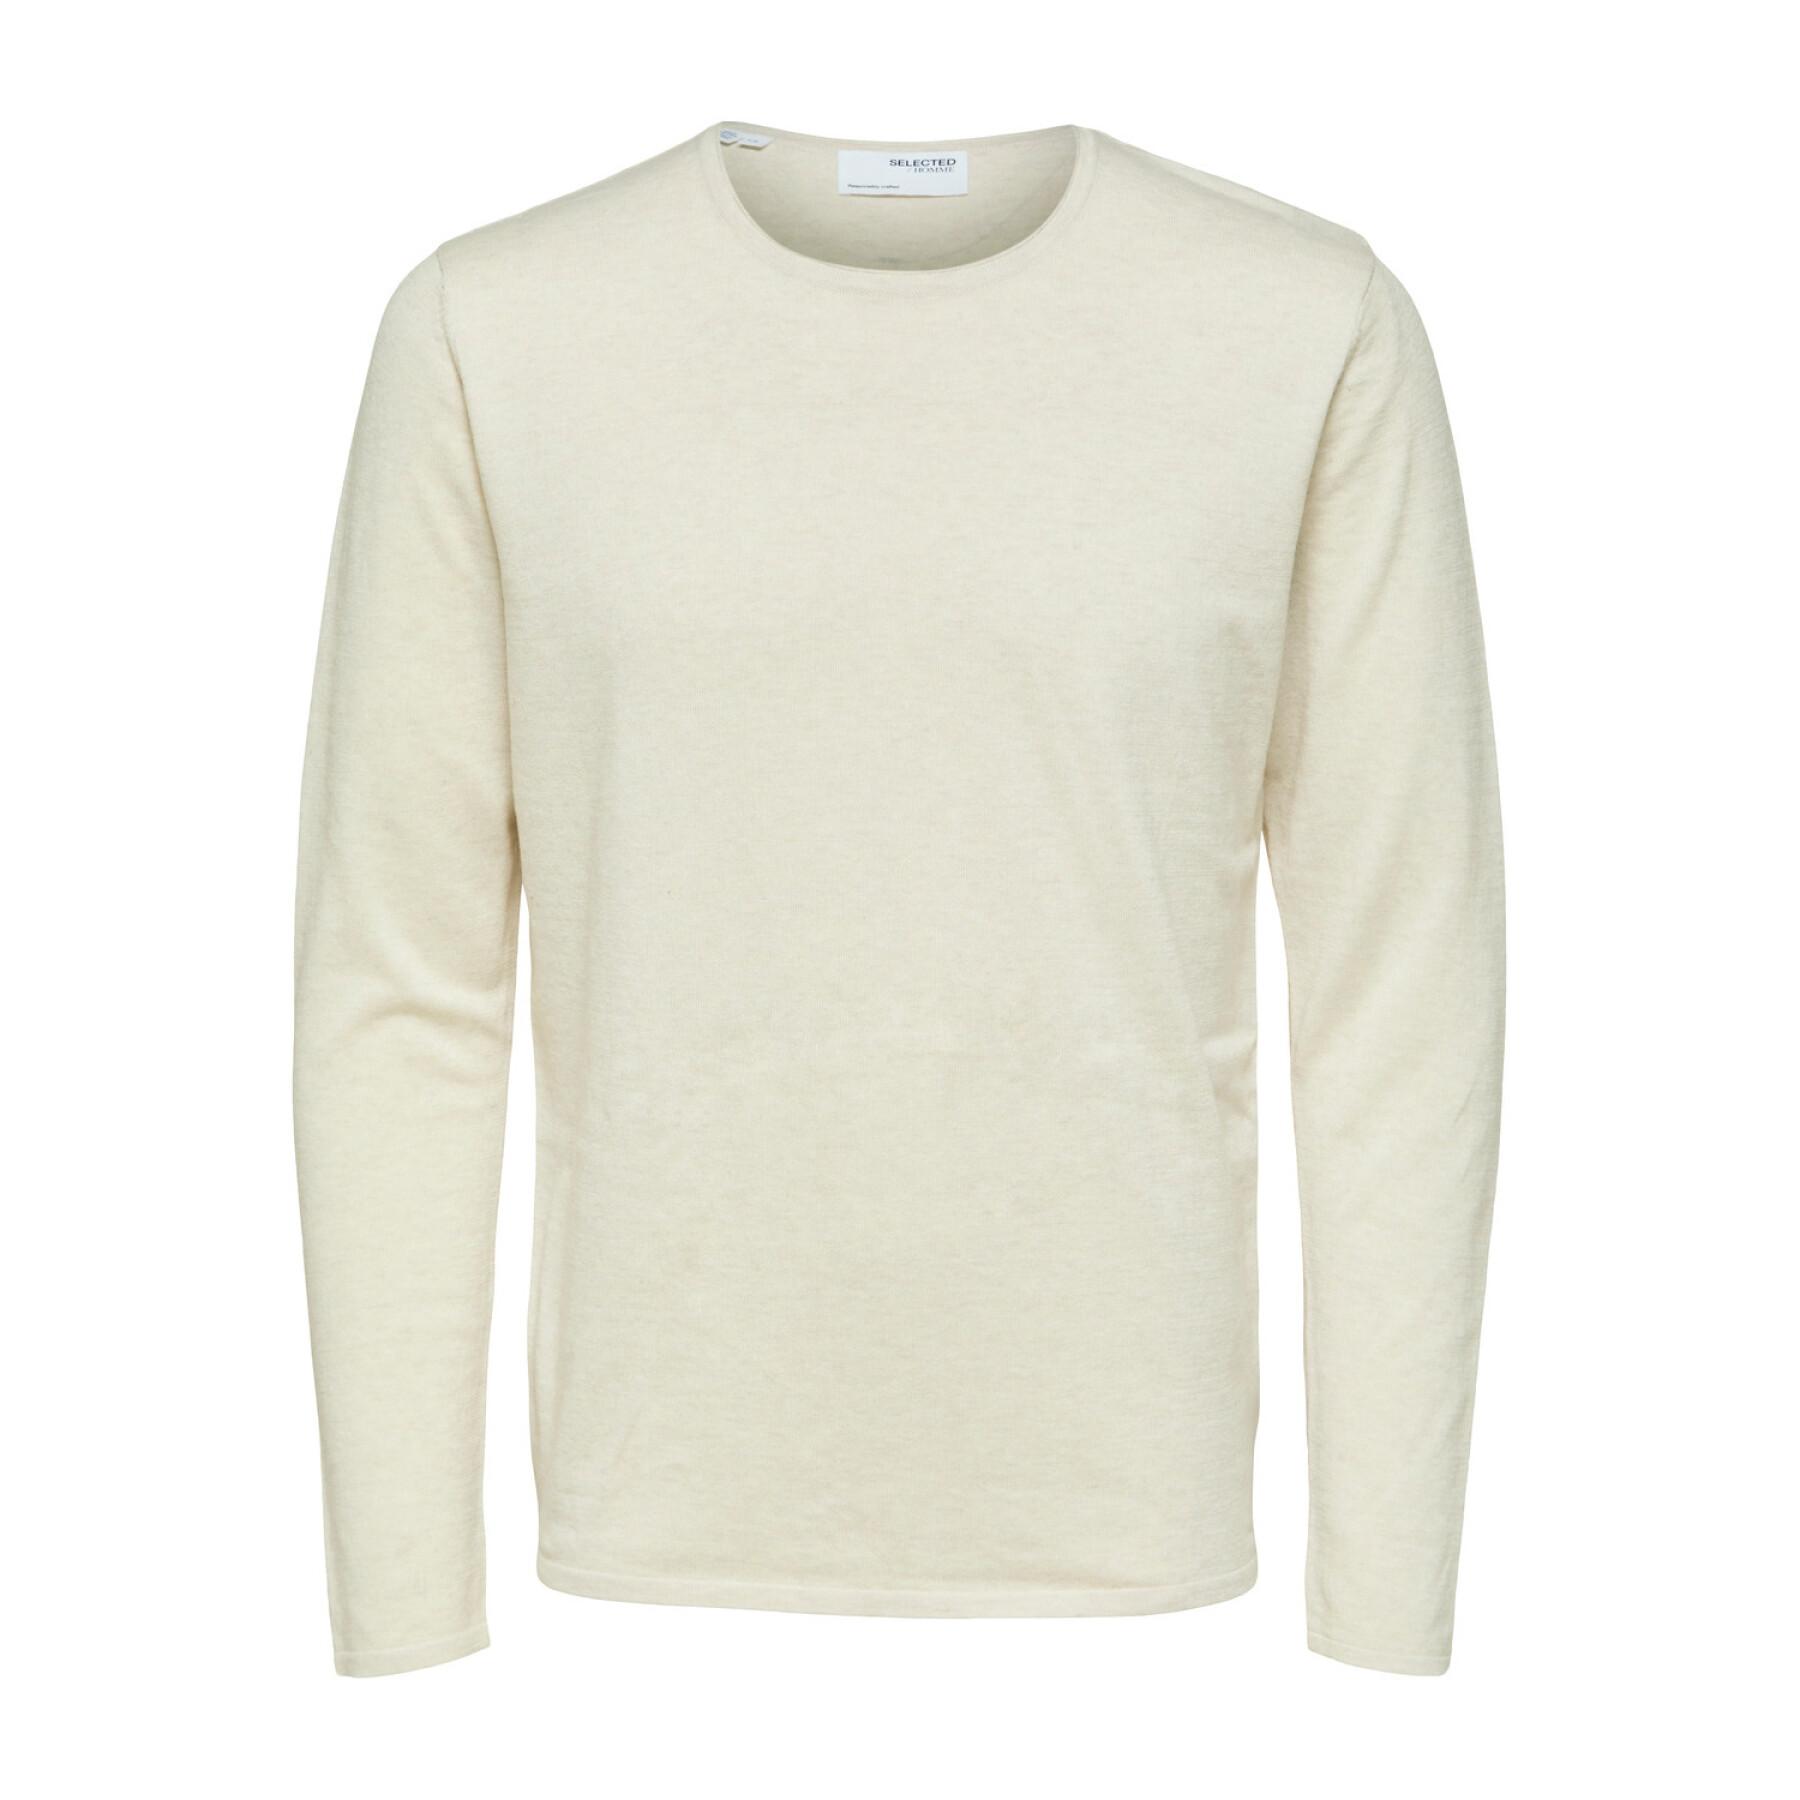 Round neck sweater Selected Rome